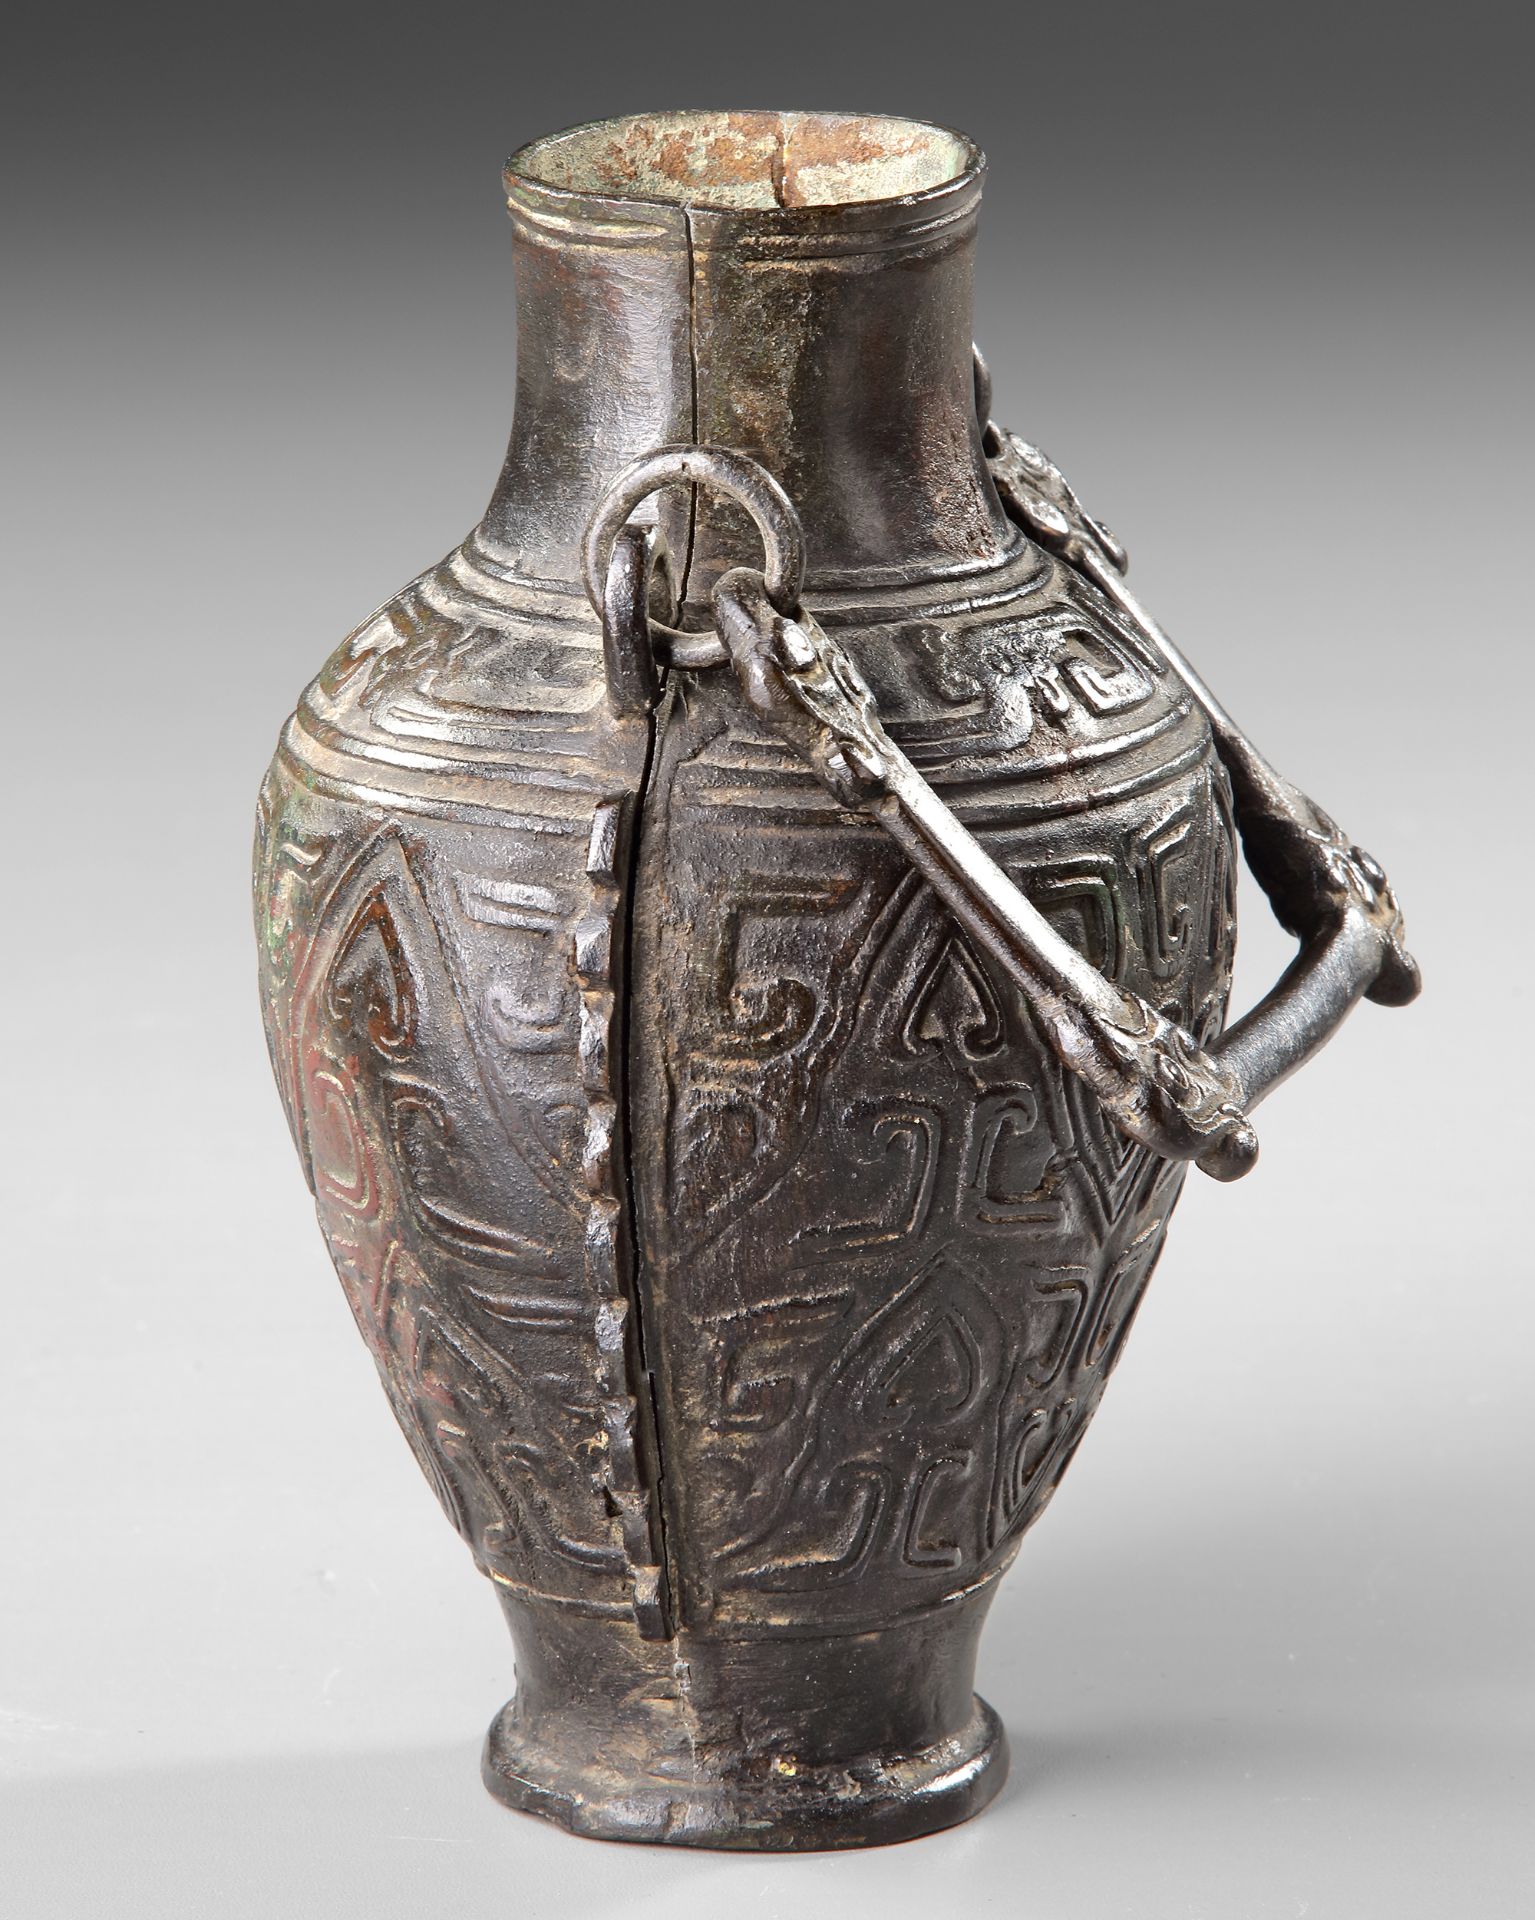 A CHINESE ARCHAISTIC BRONZE VASE, SONG DYNASTY (960 - 1279) - Image 3 of 4